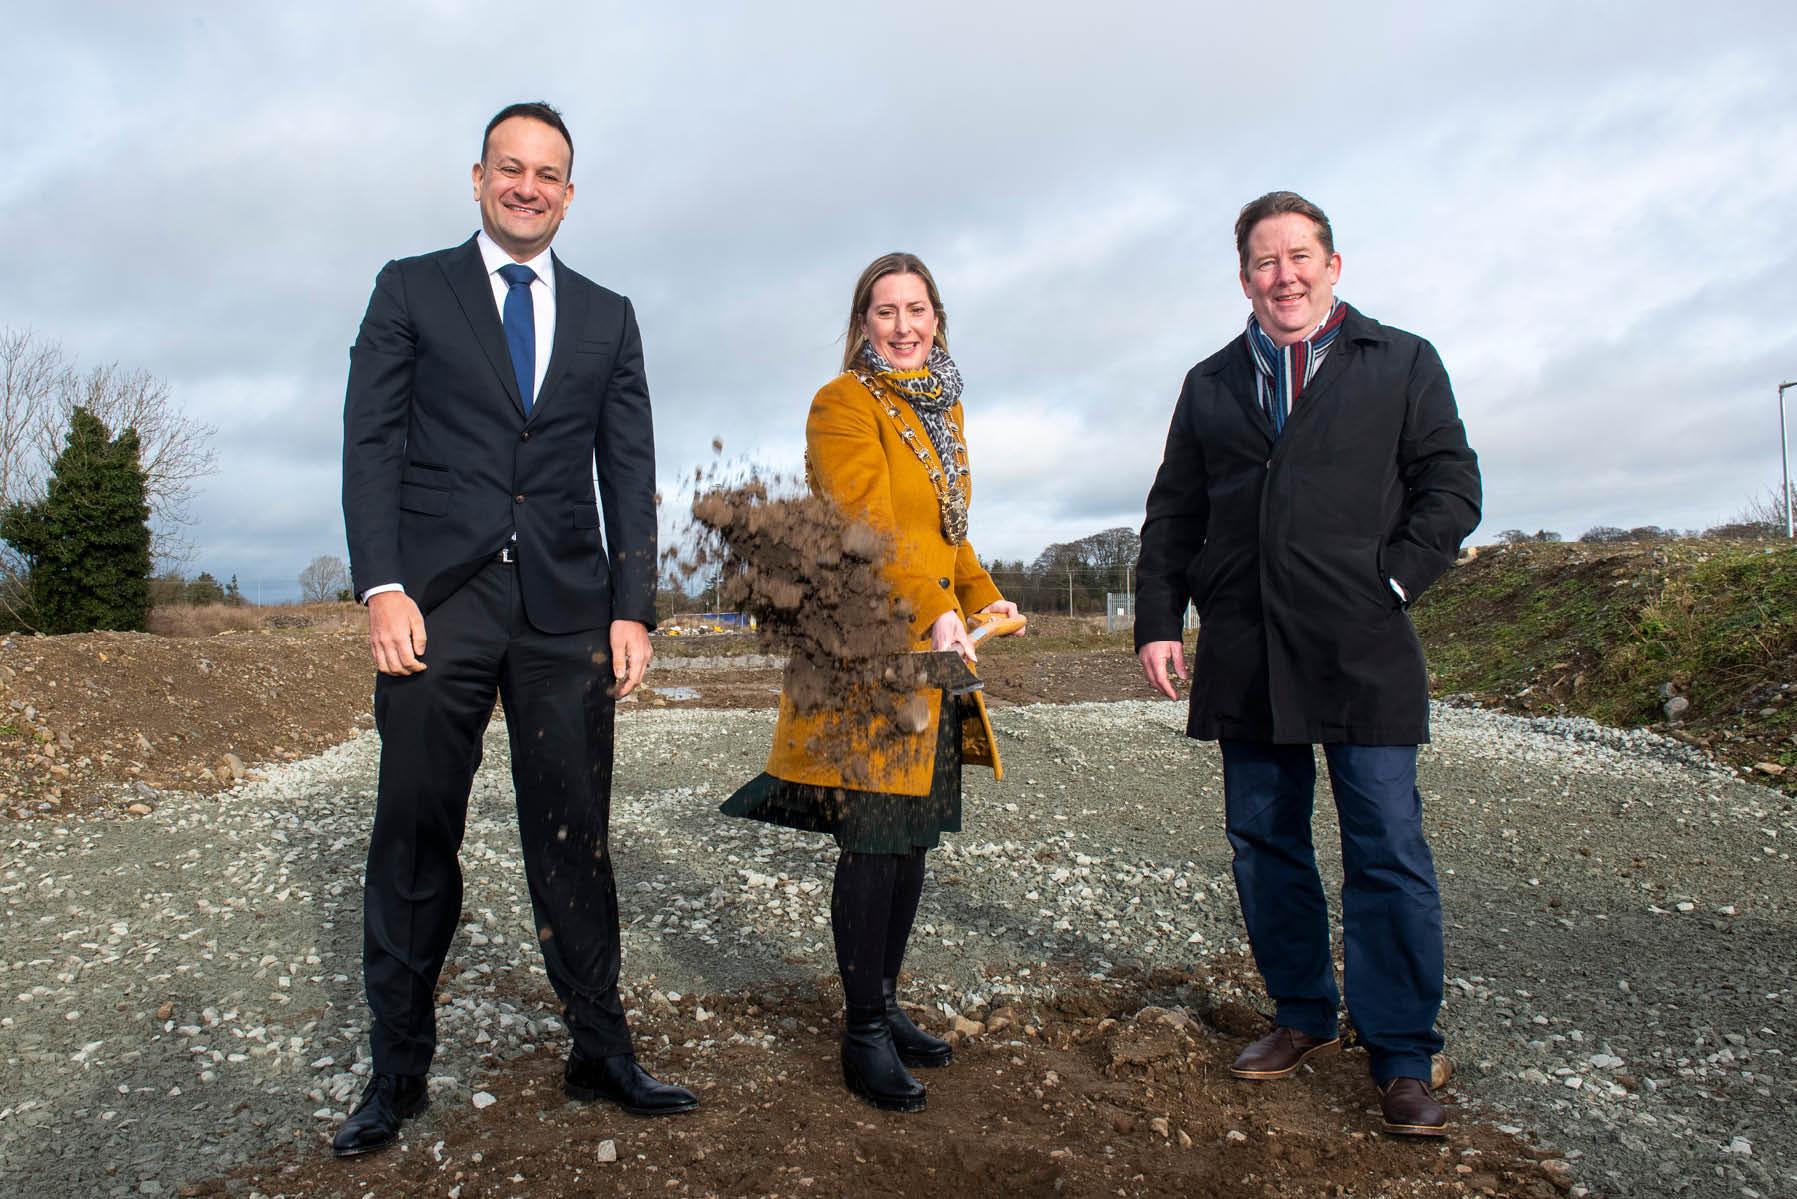 Mayor, Tainaiste and Minister for Housing on site turning first sod with spade